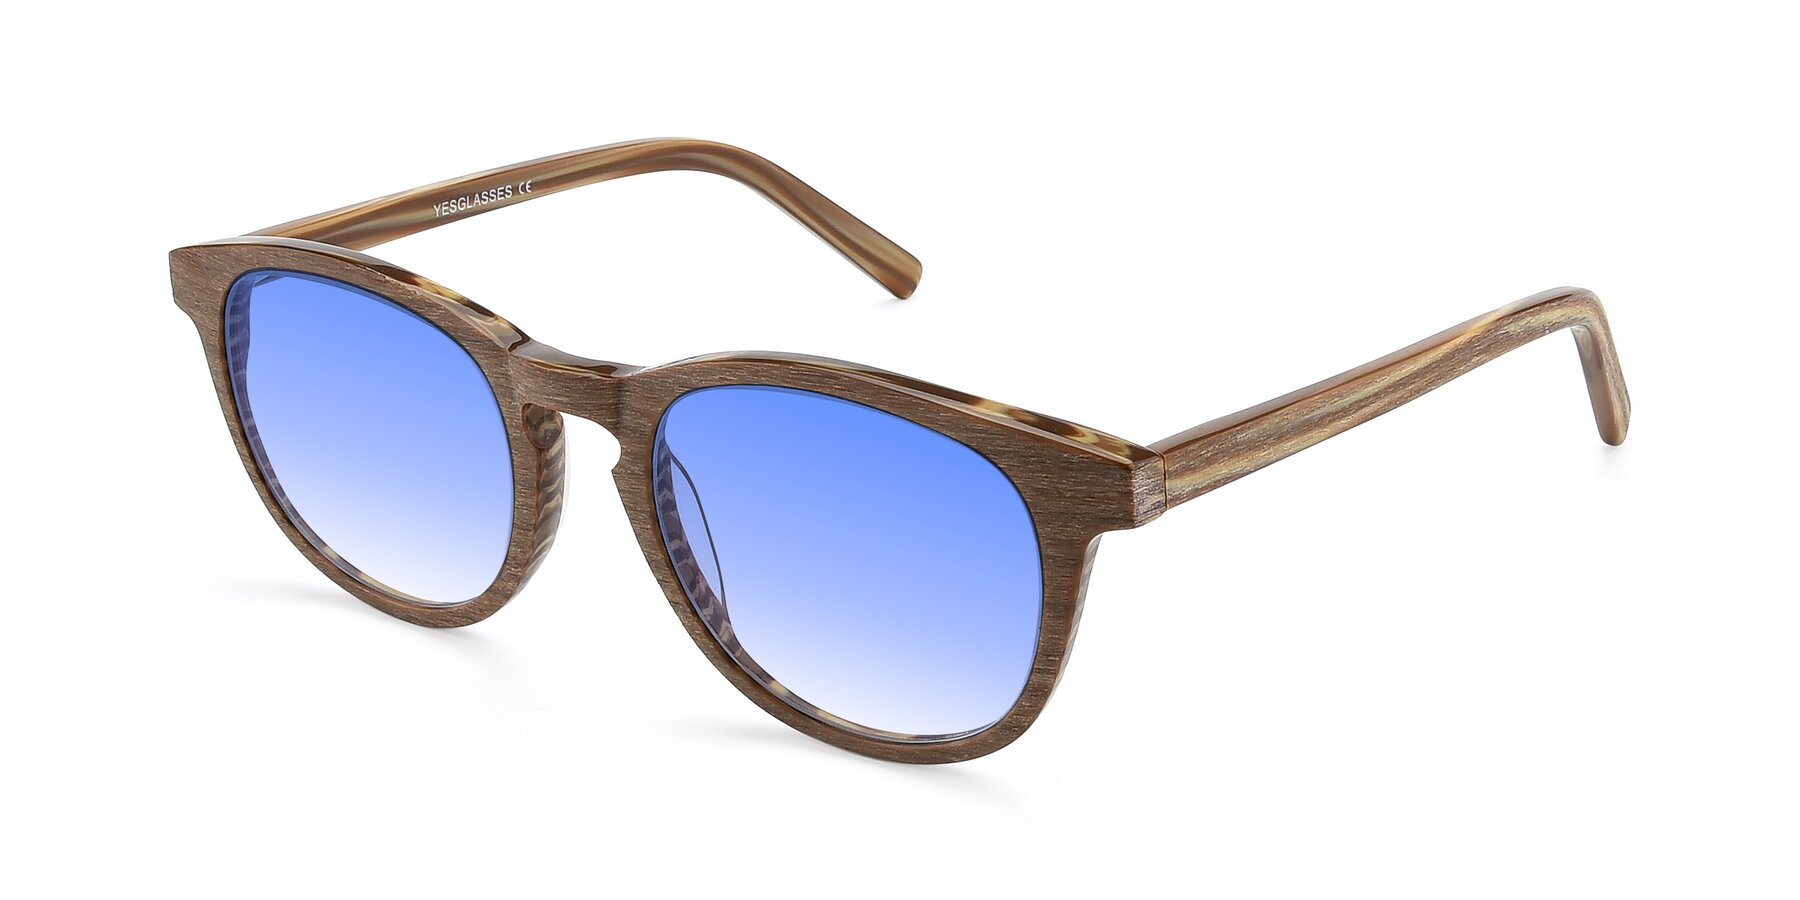 Angle of SR6044 in Brown-Wooden with Blue Gradient Lenses